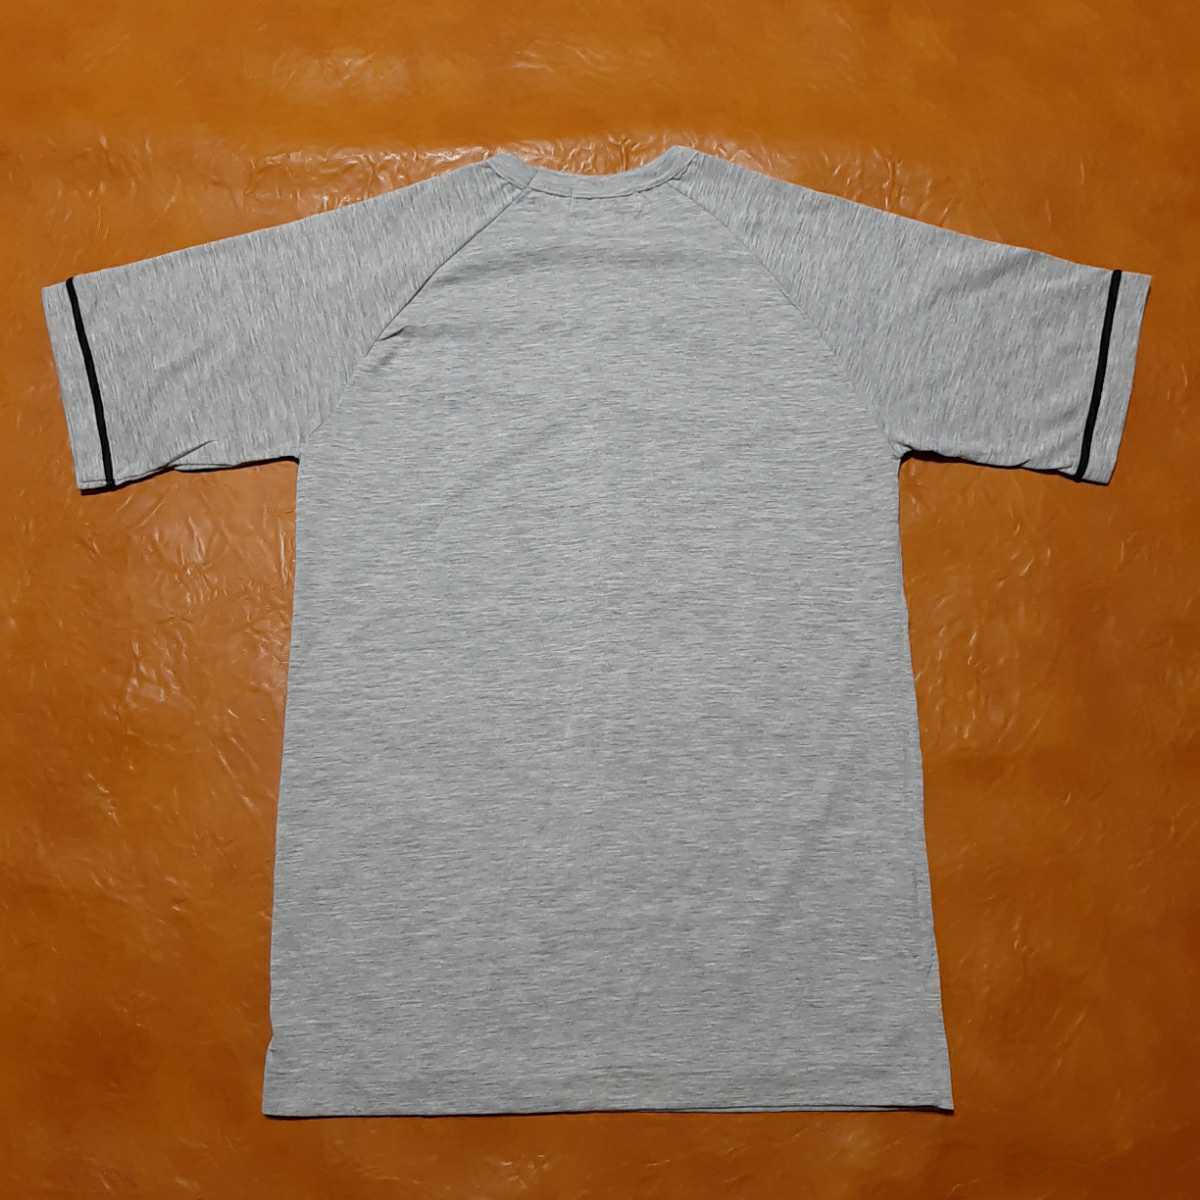  Honda HONDA SR PRODUCT Novelty T-shirt Nice Friends Nice Manners gray S made in Japan Showa era that time thing not yet have on Nicest People campaign 